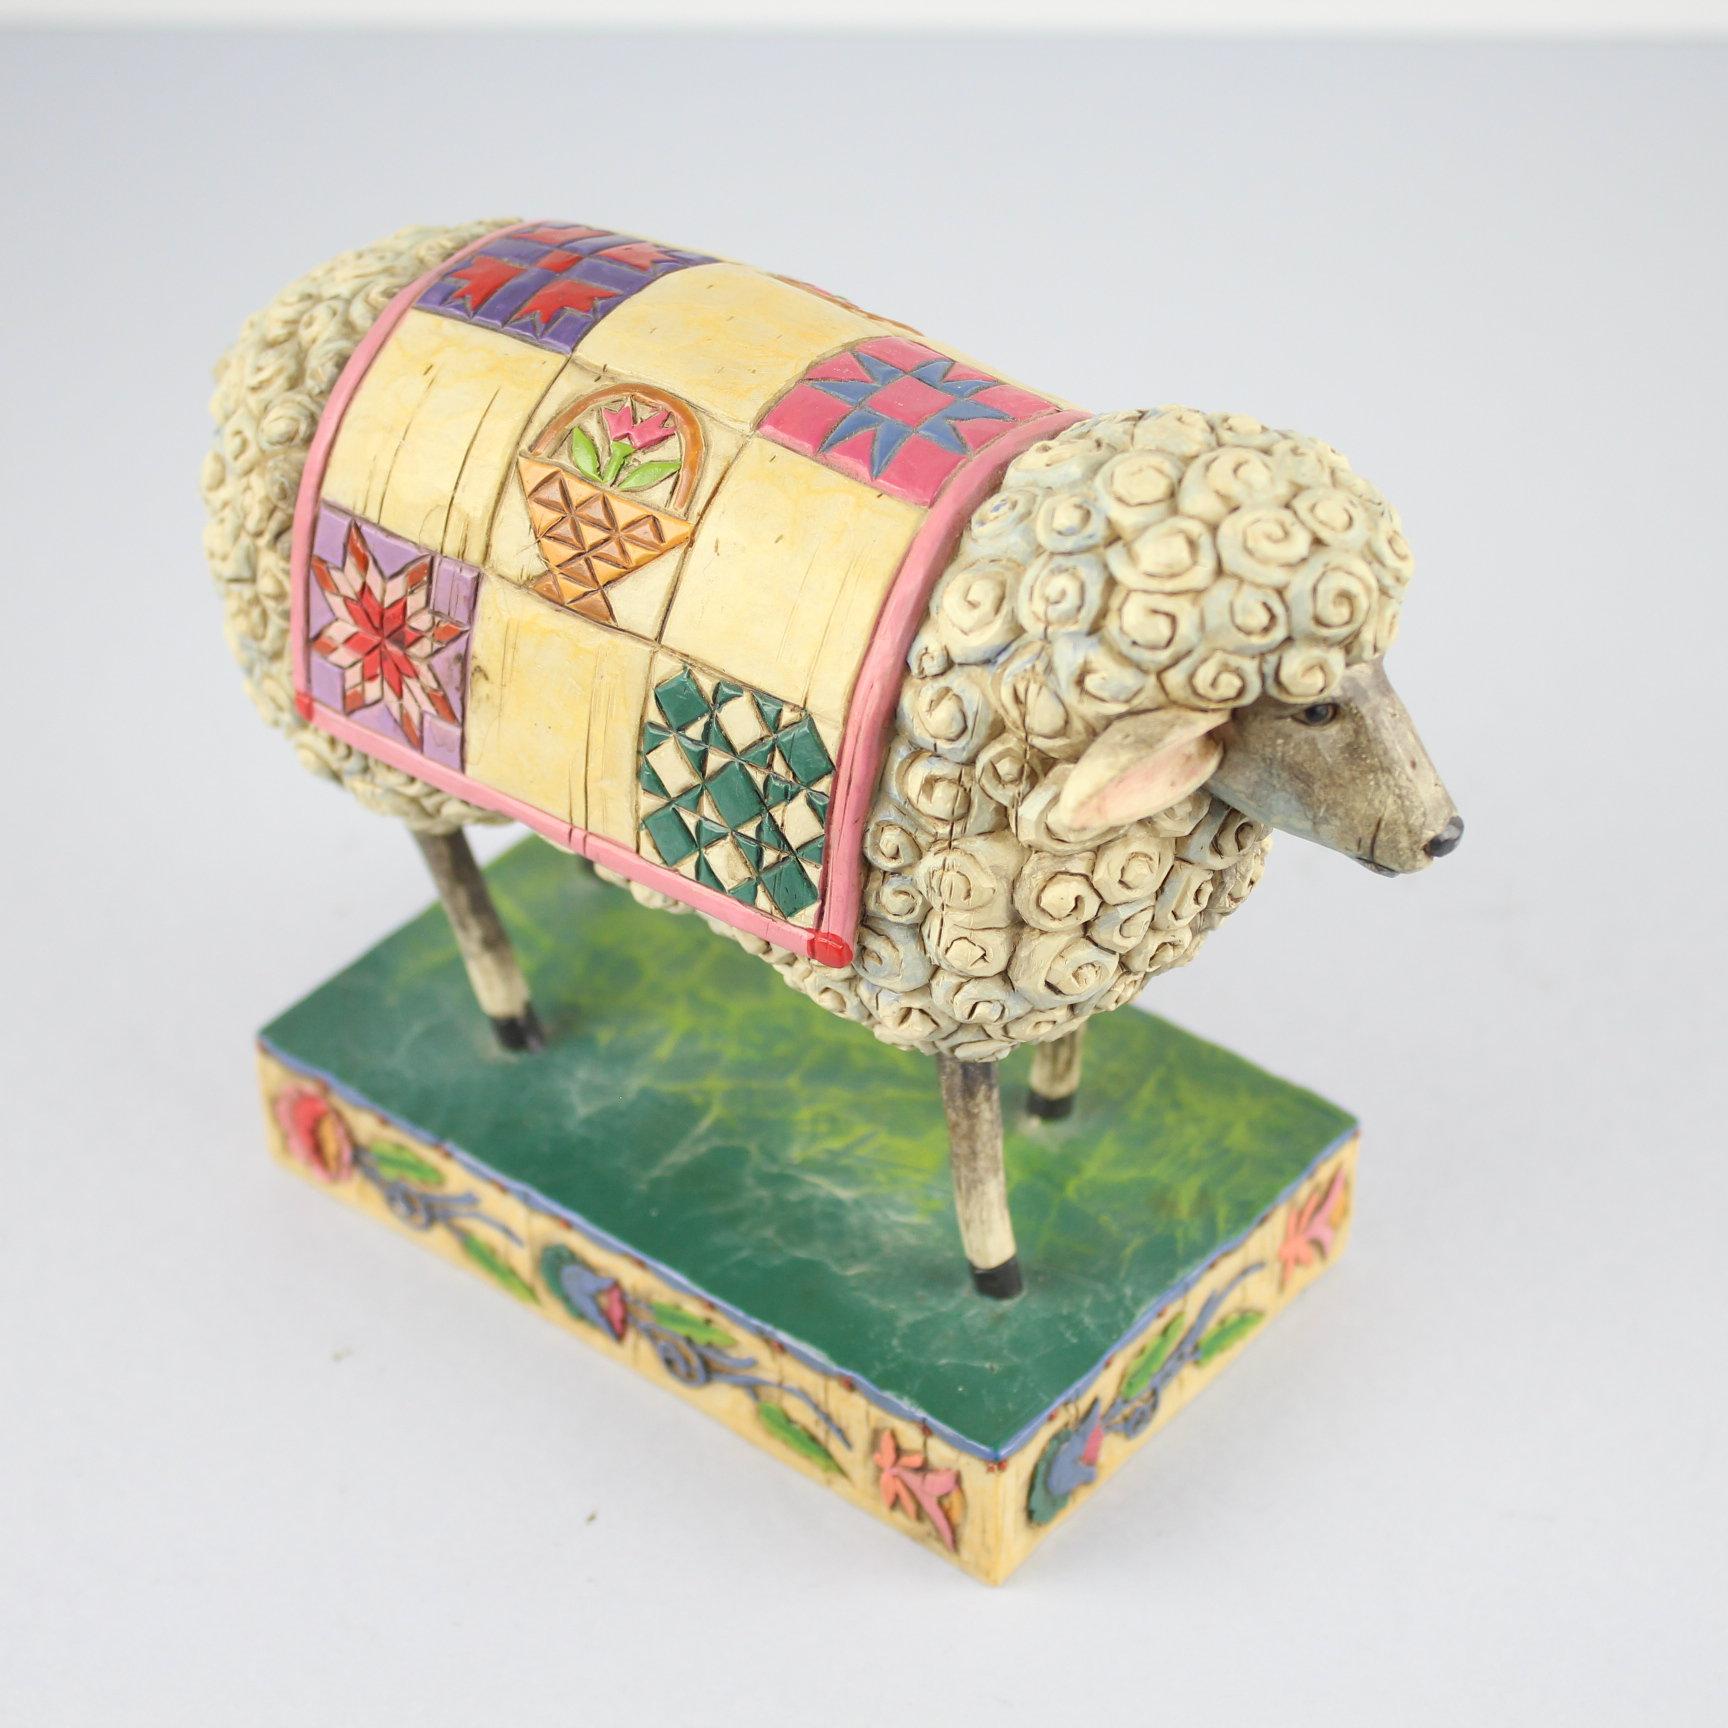 2003 Jim Shore Peace in the Valley Sheep Figurine Heartwood Creek